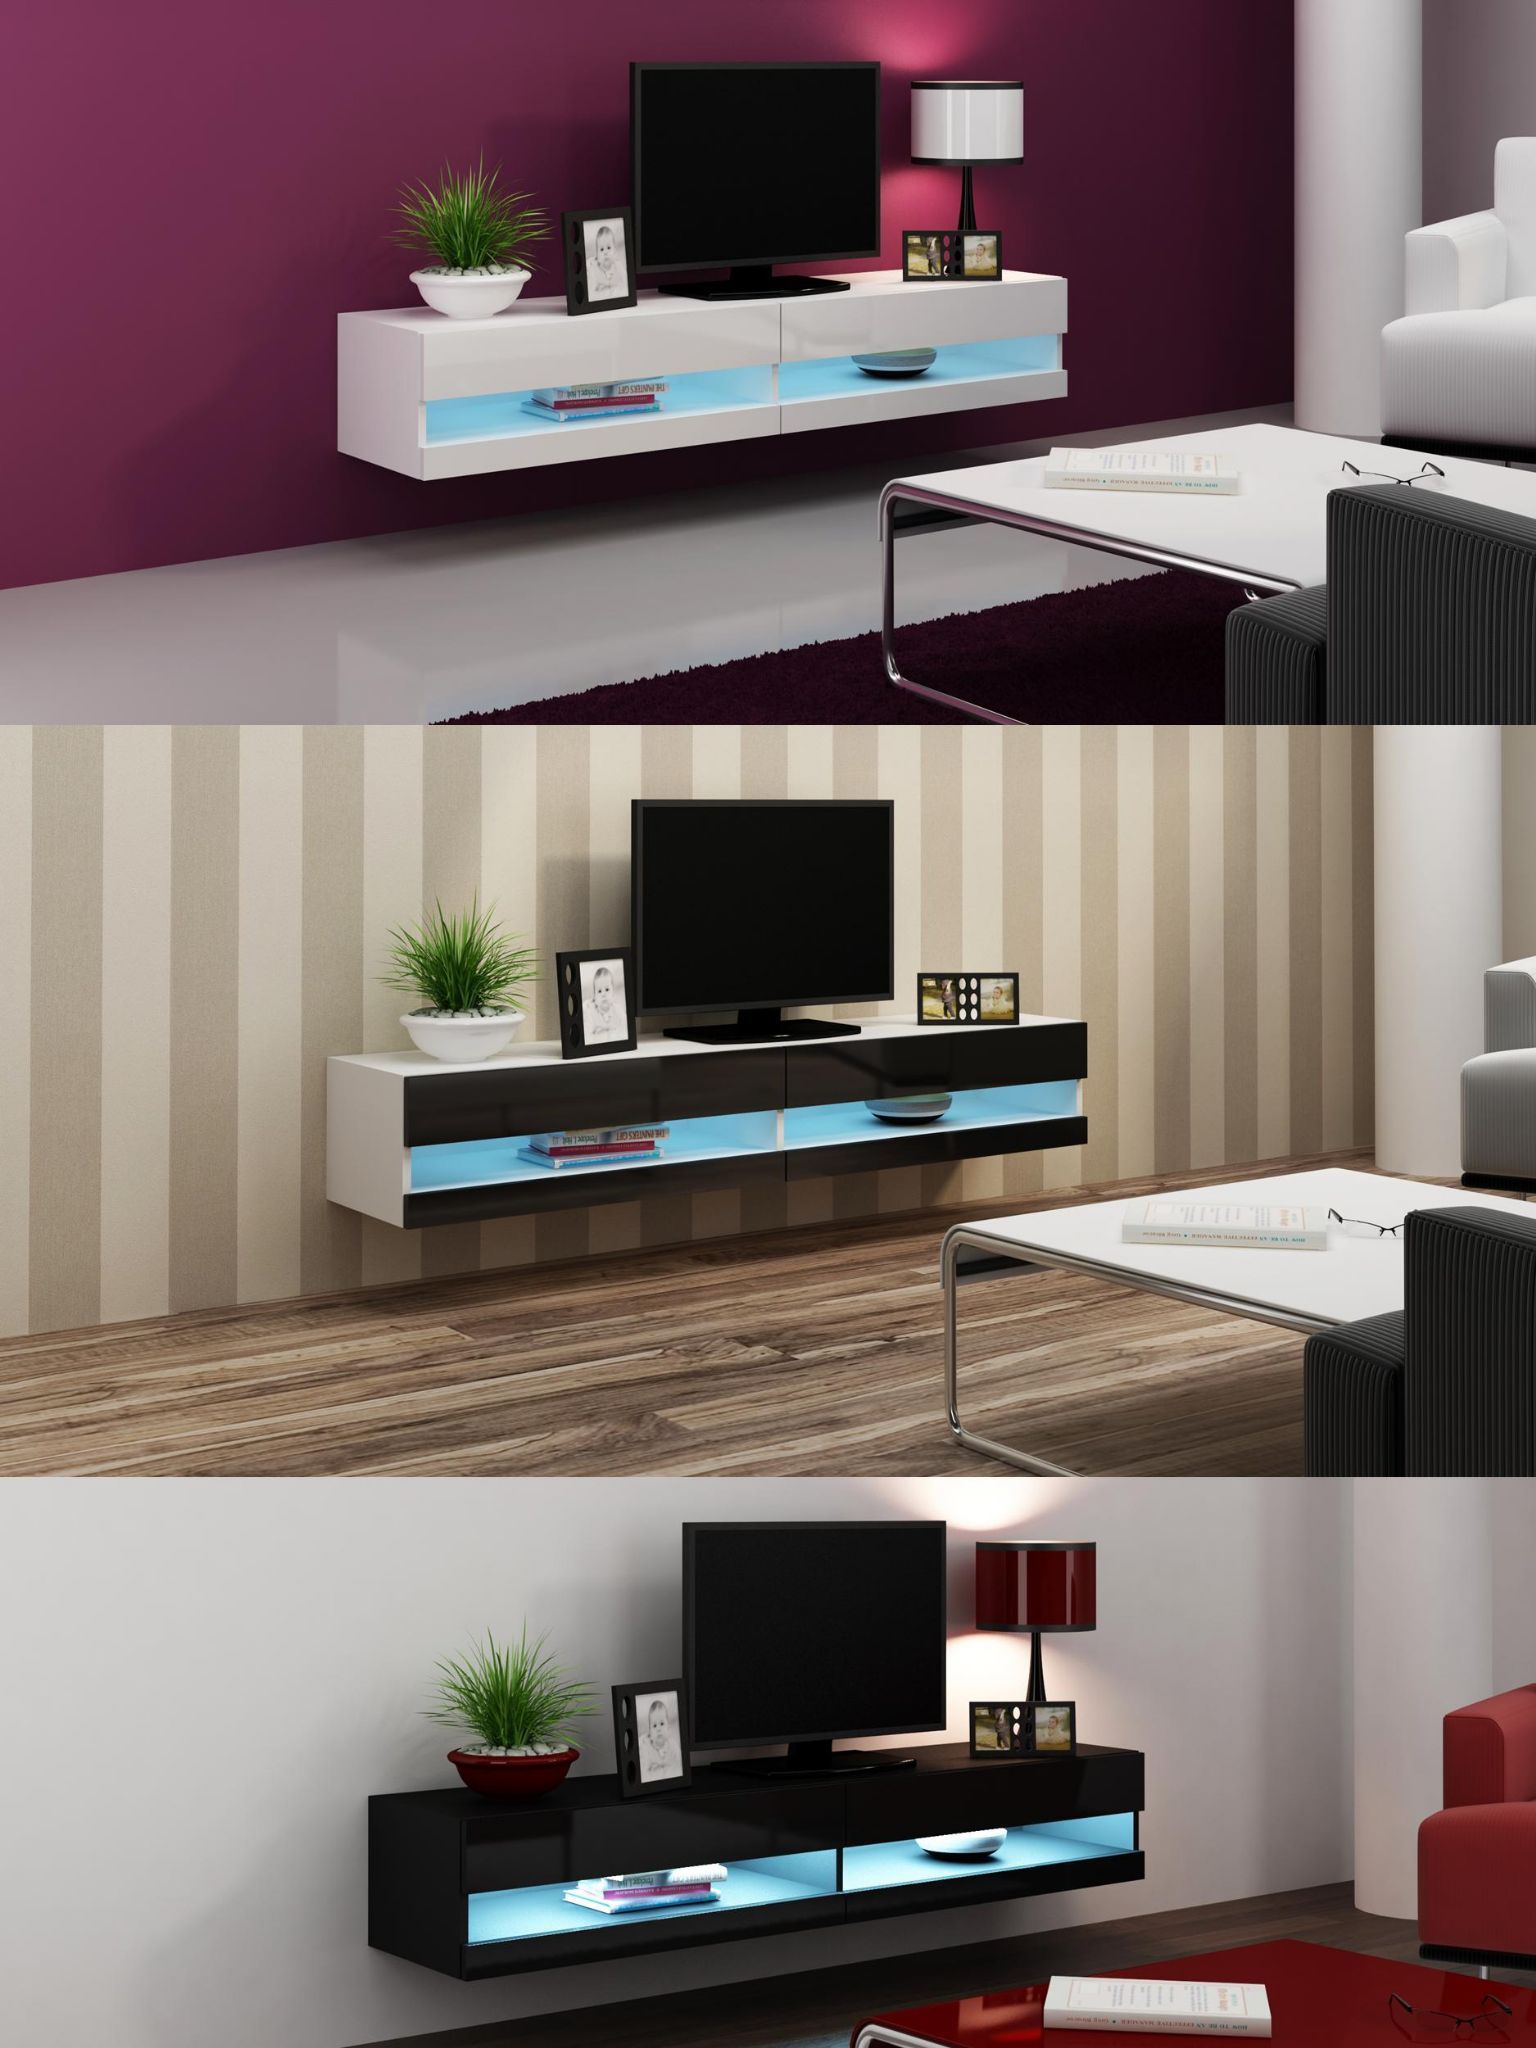 Pin On House Ideas In Galicia 180cm Led Wide Wall Tv Unit Stands (View 11 of 15)